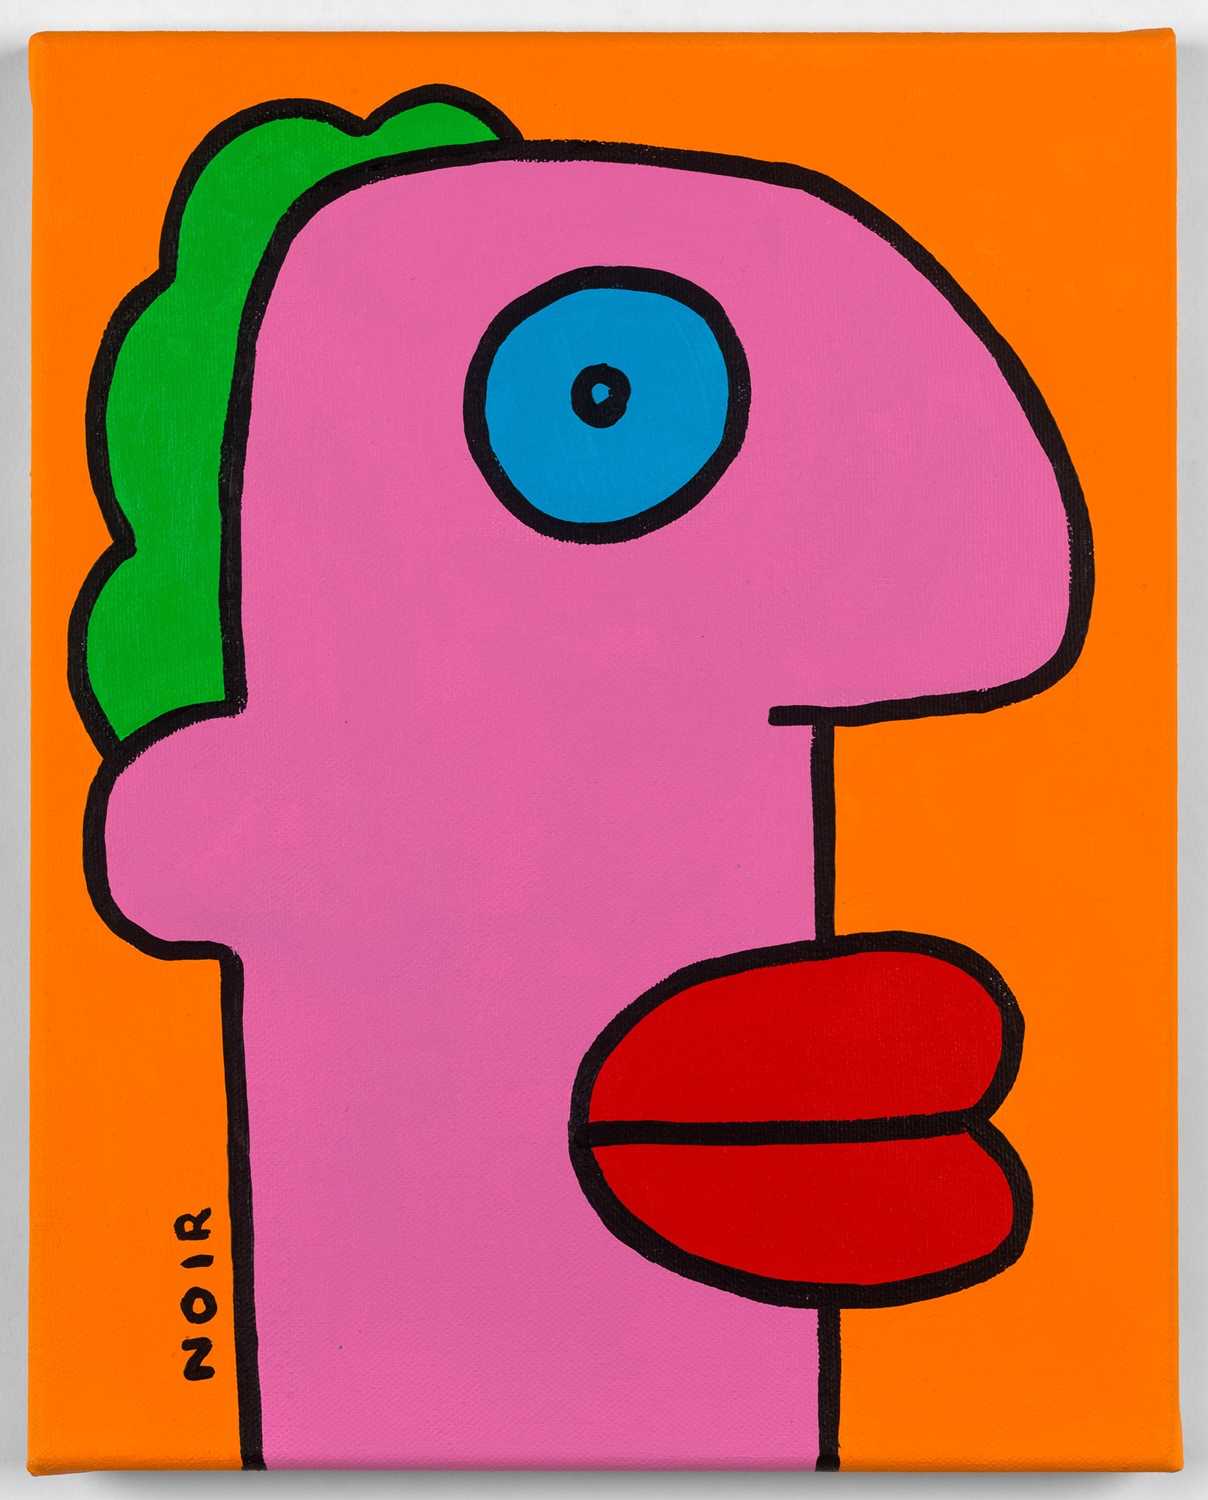 Lot 324 - Thierry Noir (French 1958-), 'I Have Been Waiting Long Enough; I Am Going On A Foot Trip To See If There Is Sunshine At The End Of The Tunnel', 2020